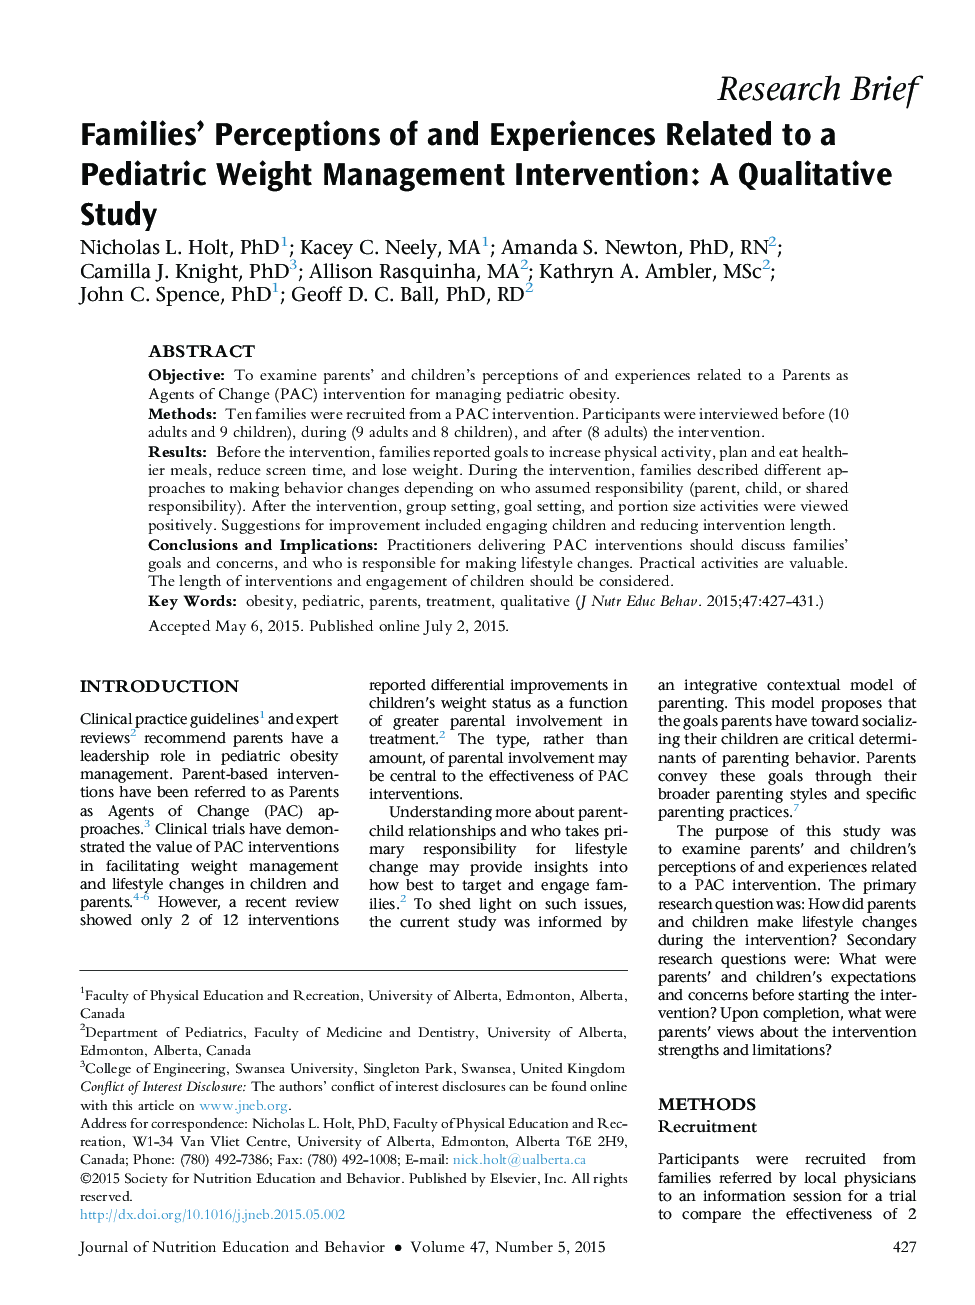 Families' Perceptions of and Experiences Related to a Pediatric Weight Management Intervention: A Qualitative Study